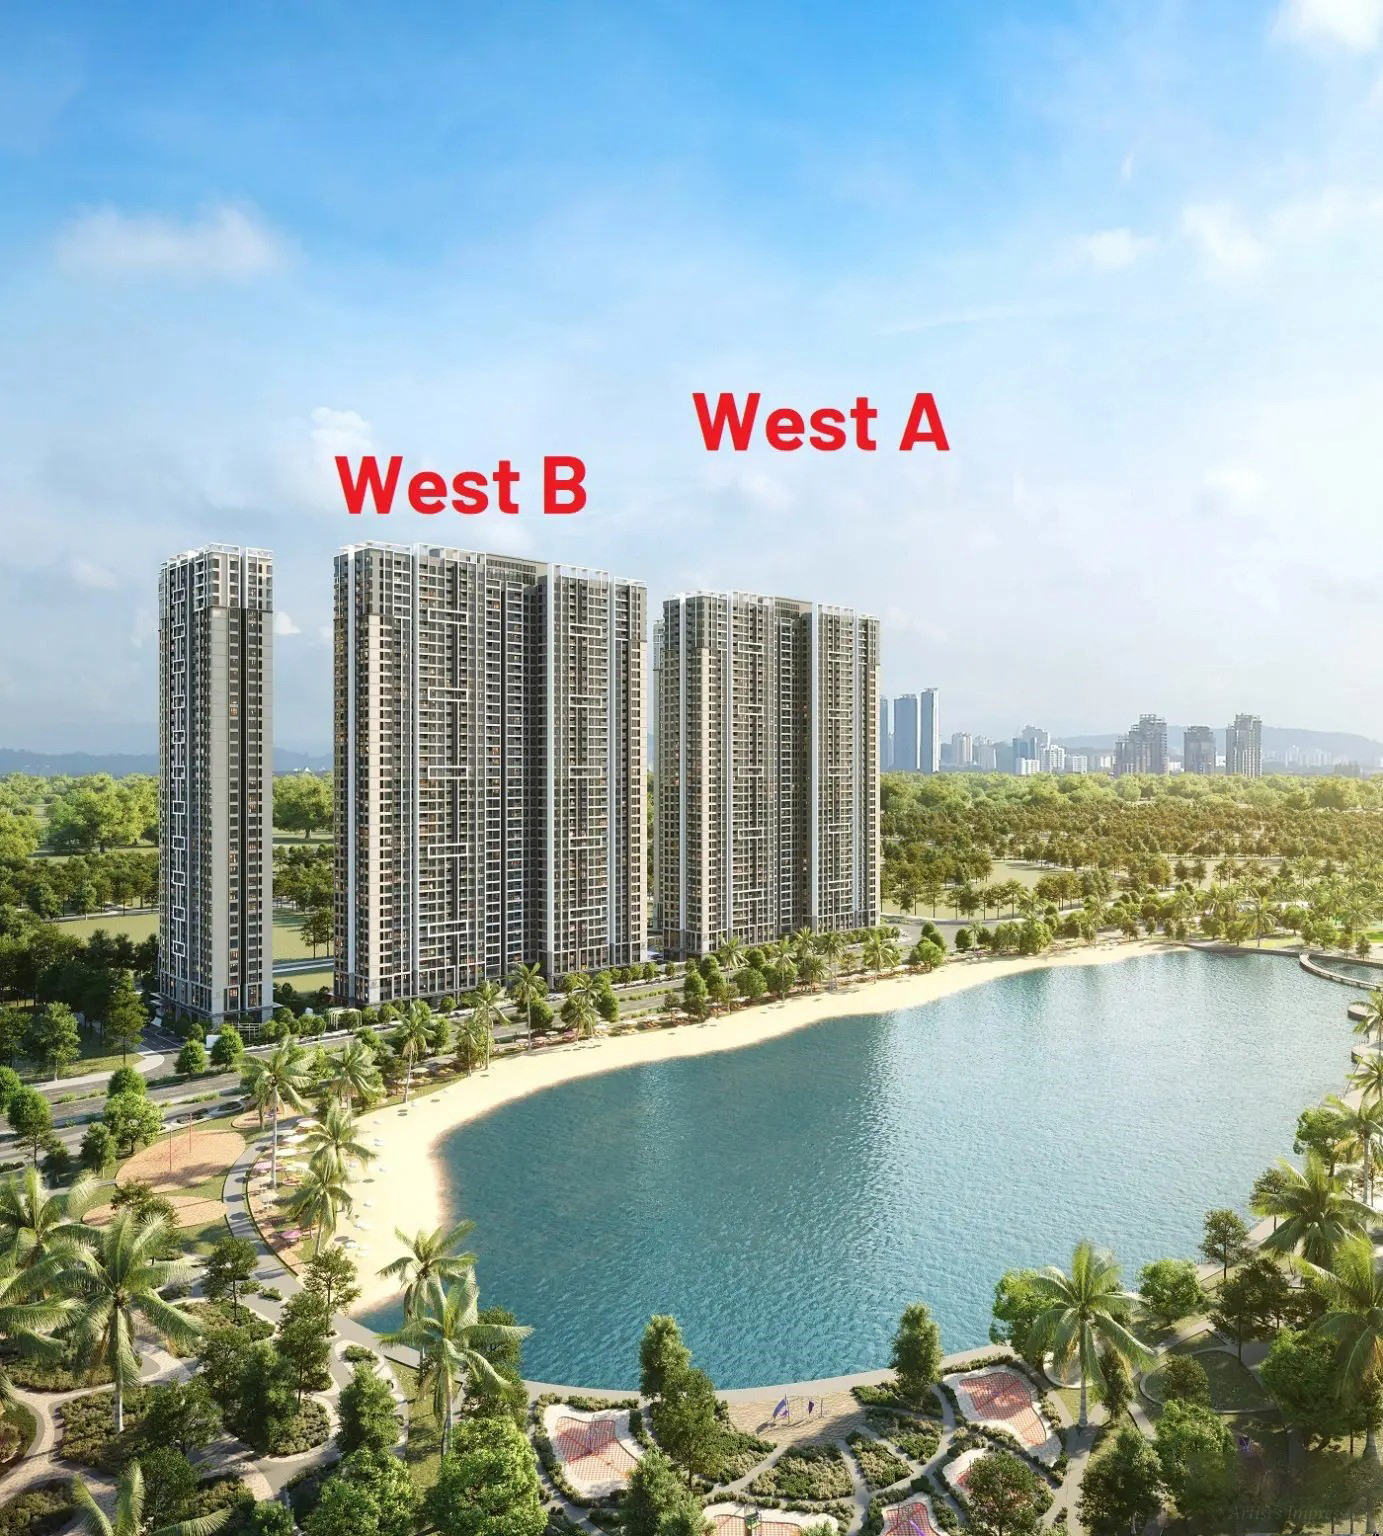 loai-can-ho-nao-co-so-luong-it-nhat-tai-toa-west-b-masteri-west-heights-OneHousing-1